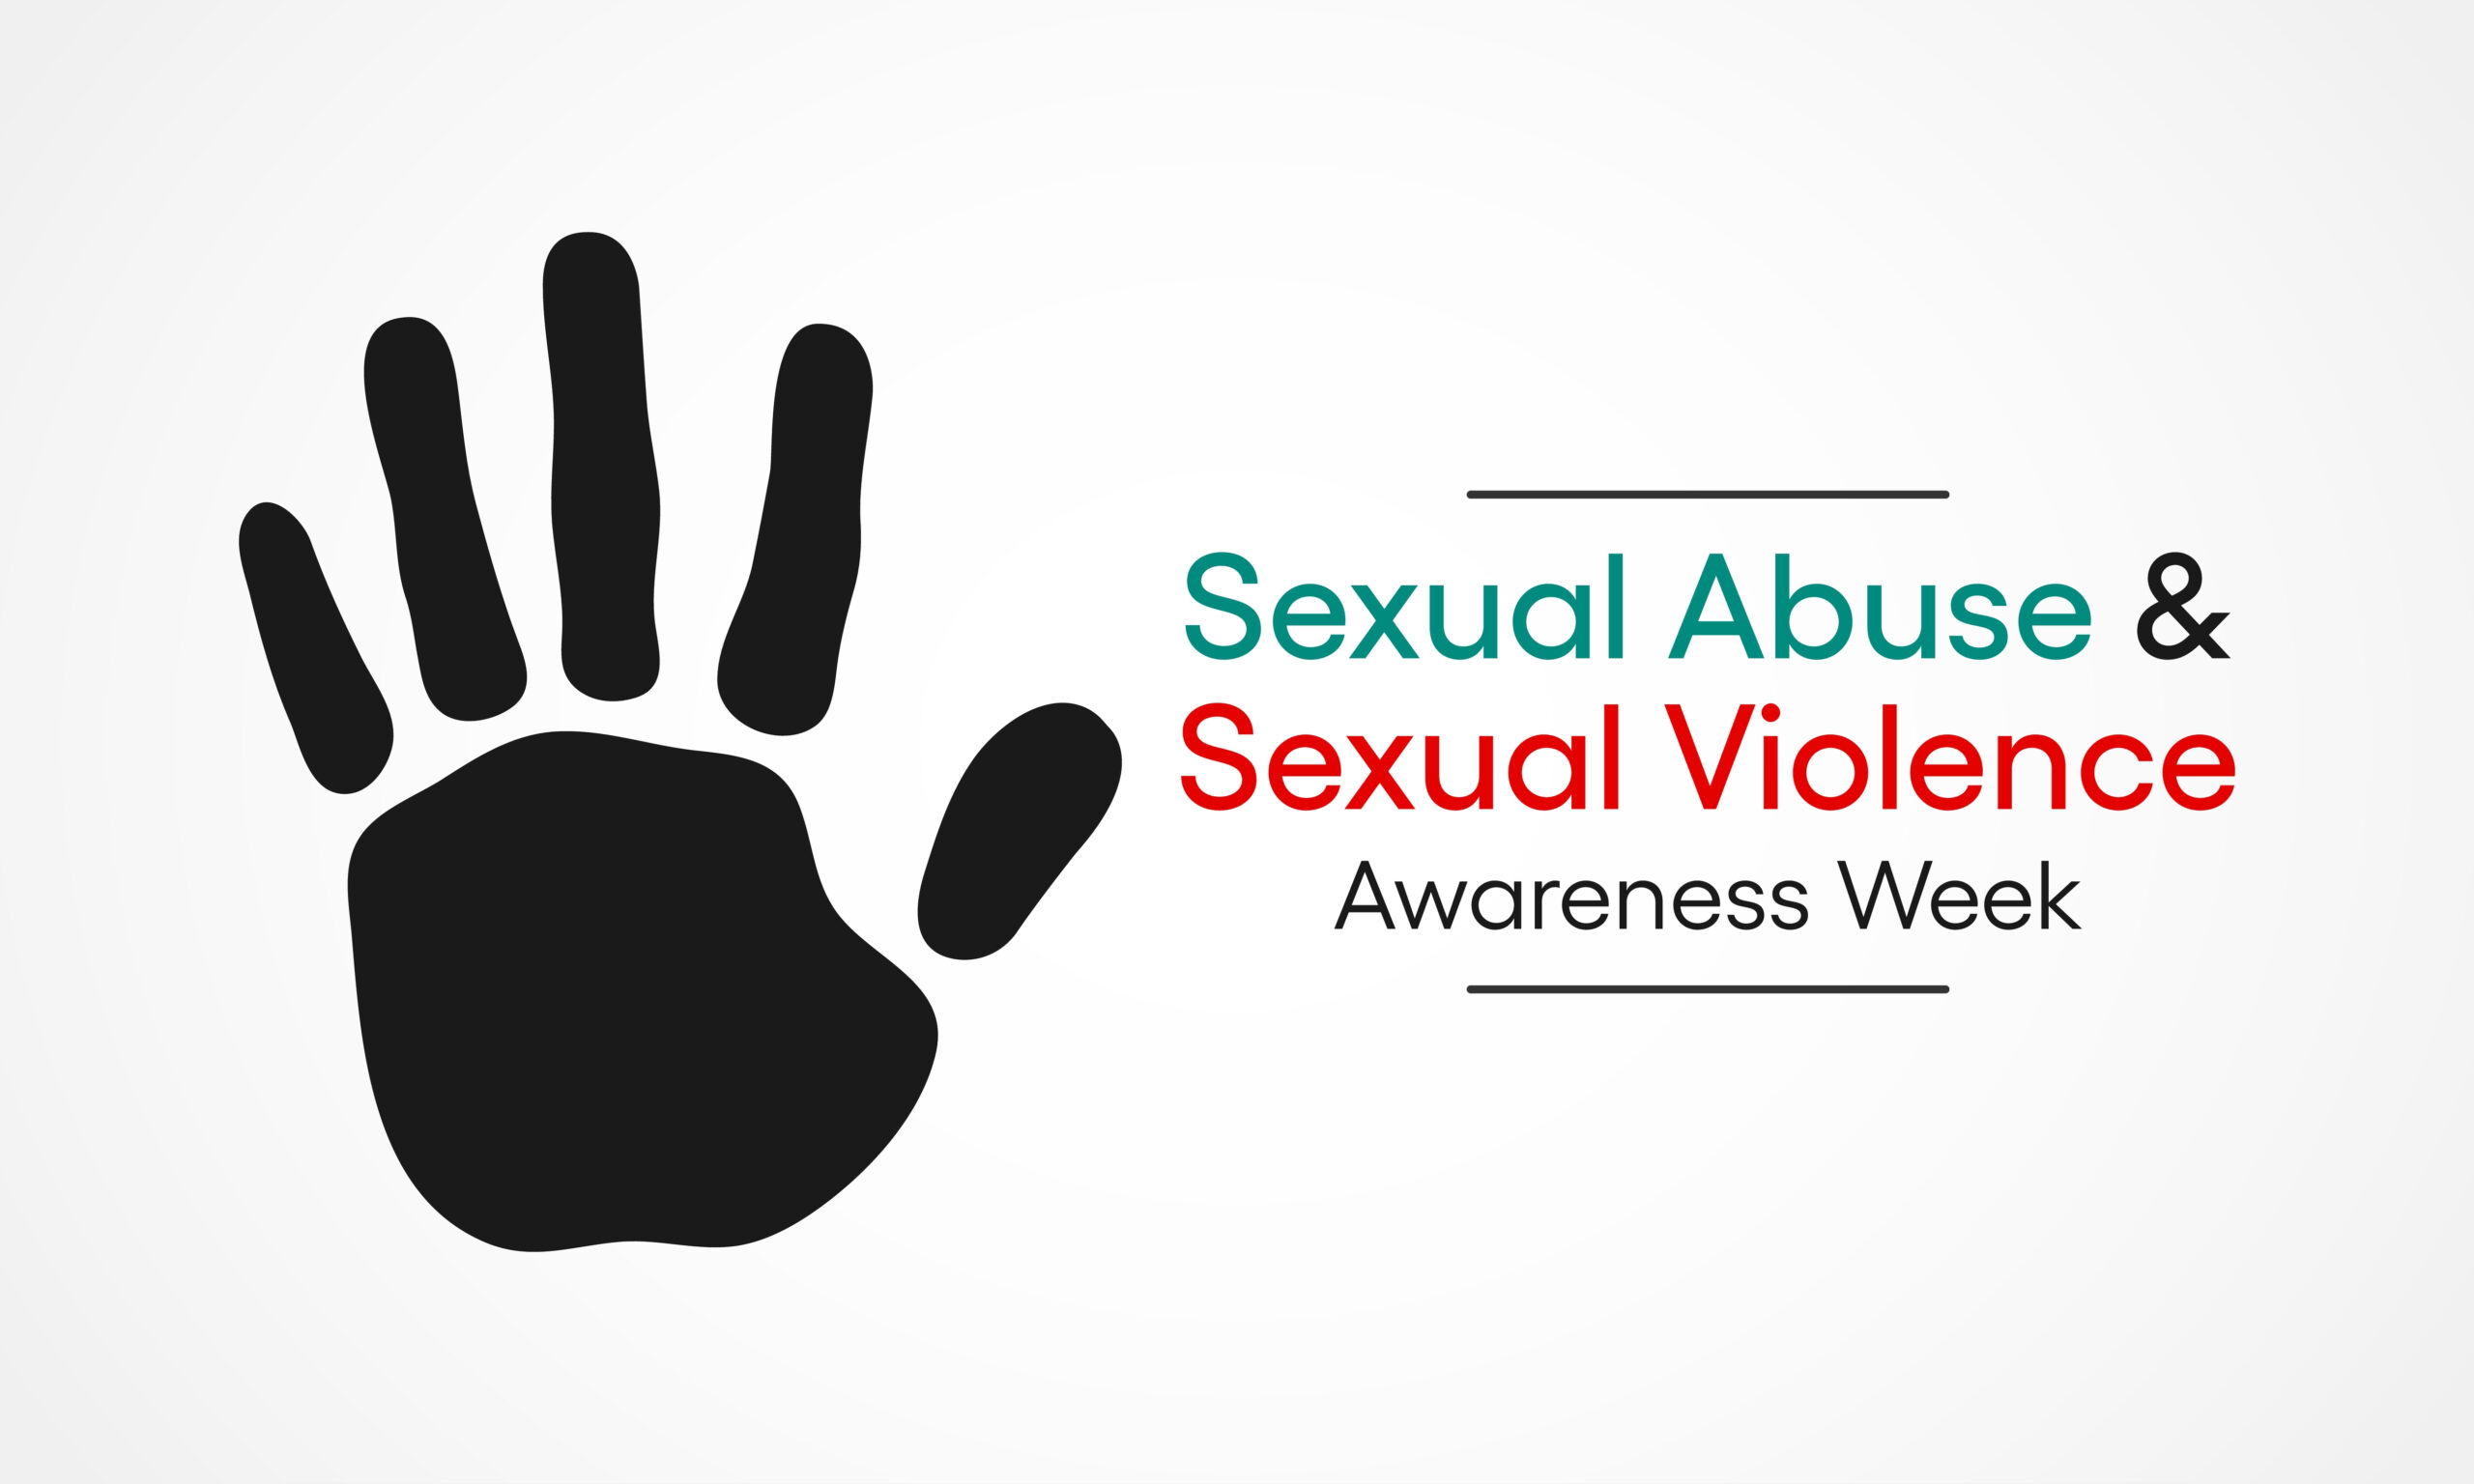 Sexual abuse and sexual violence awareness week on a white background with black hand print